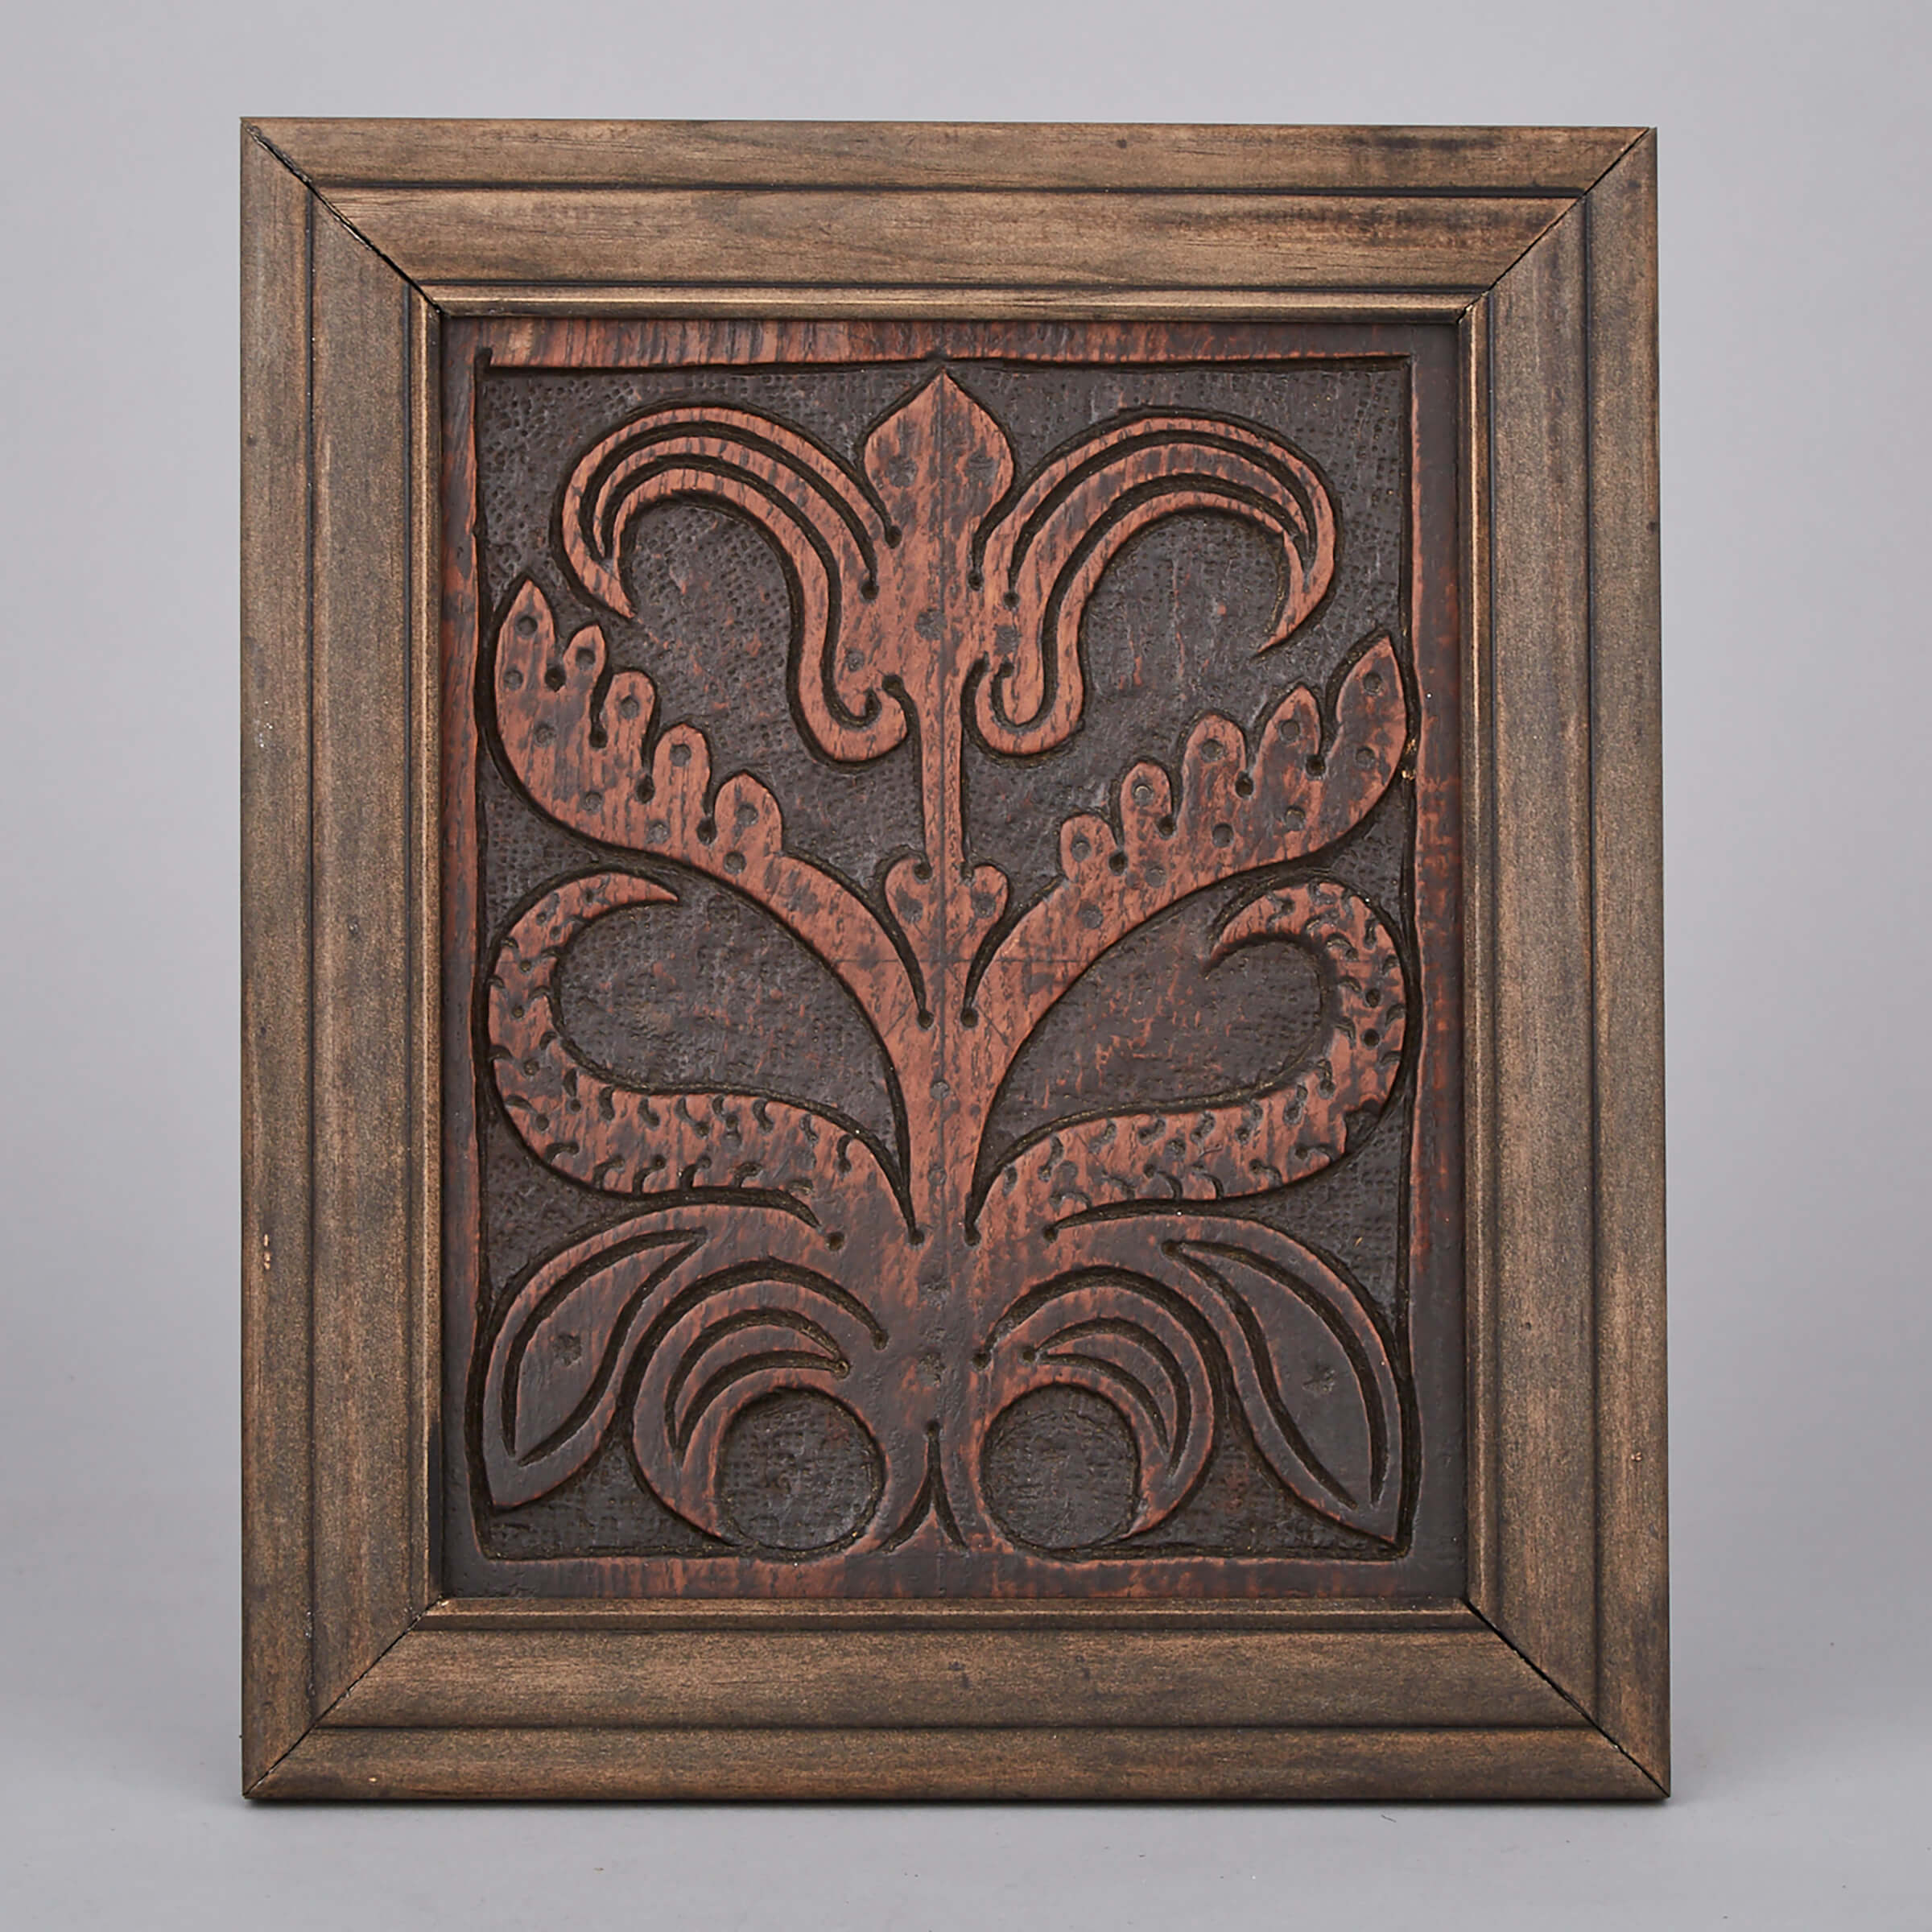 English Relief Caved Oak Tulip Panel, early 17th century